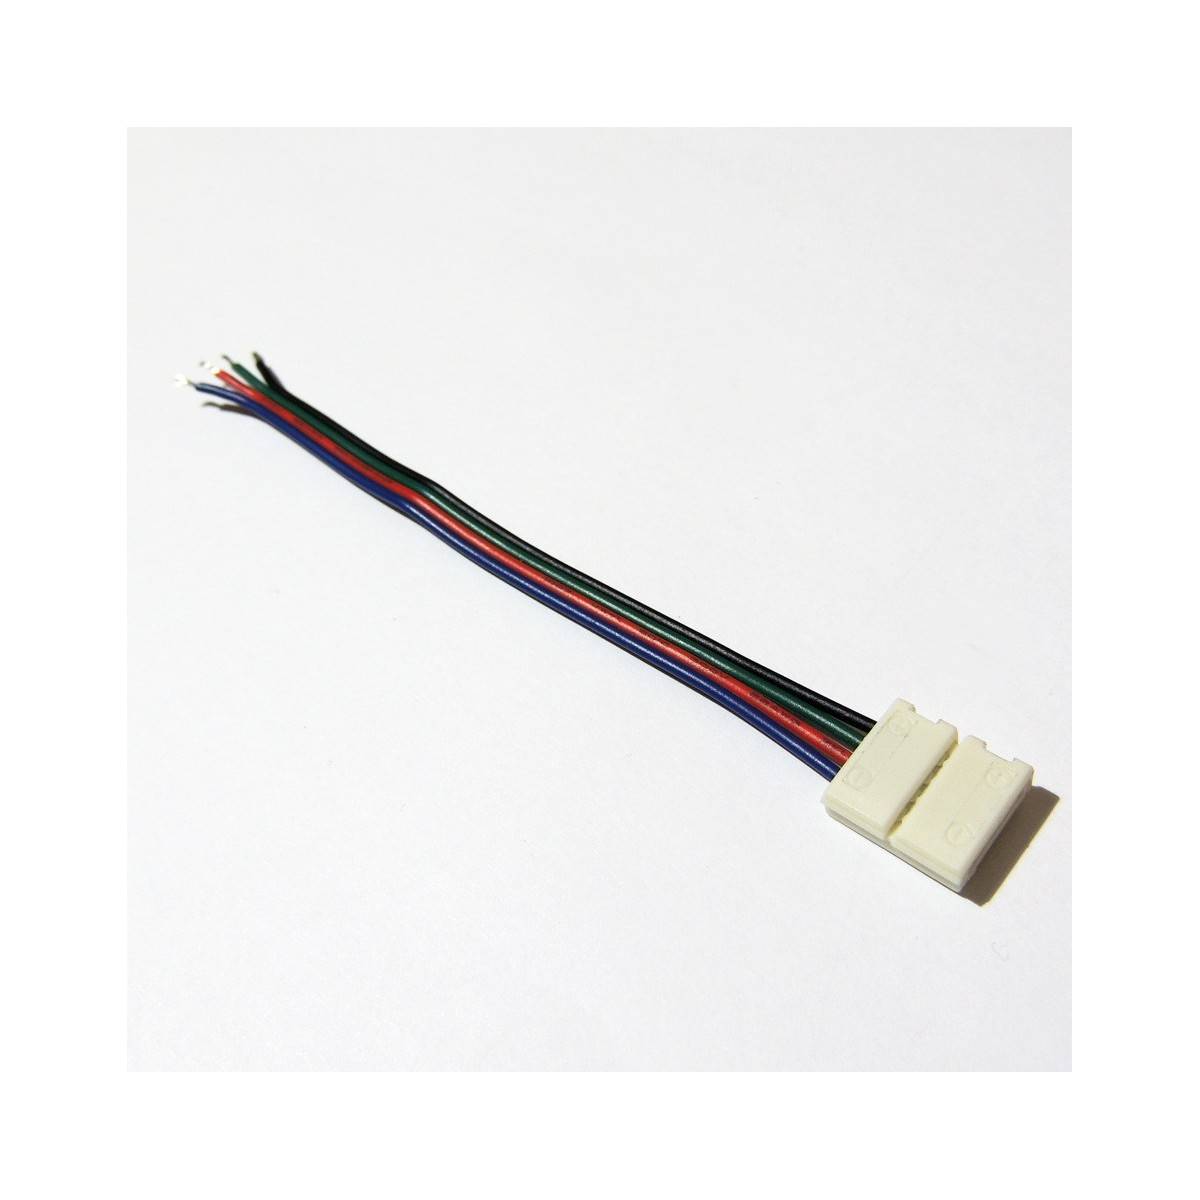 RGB LED strip connector 1 cm to cable